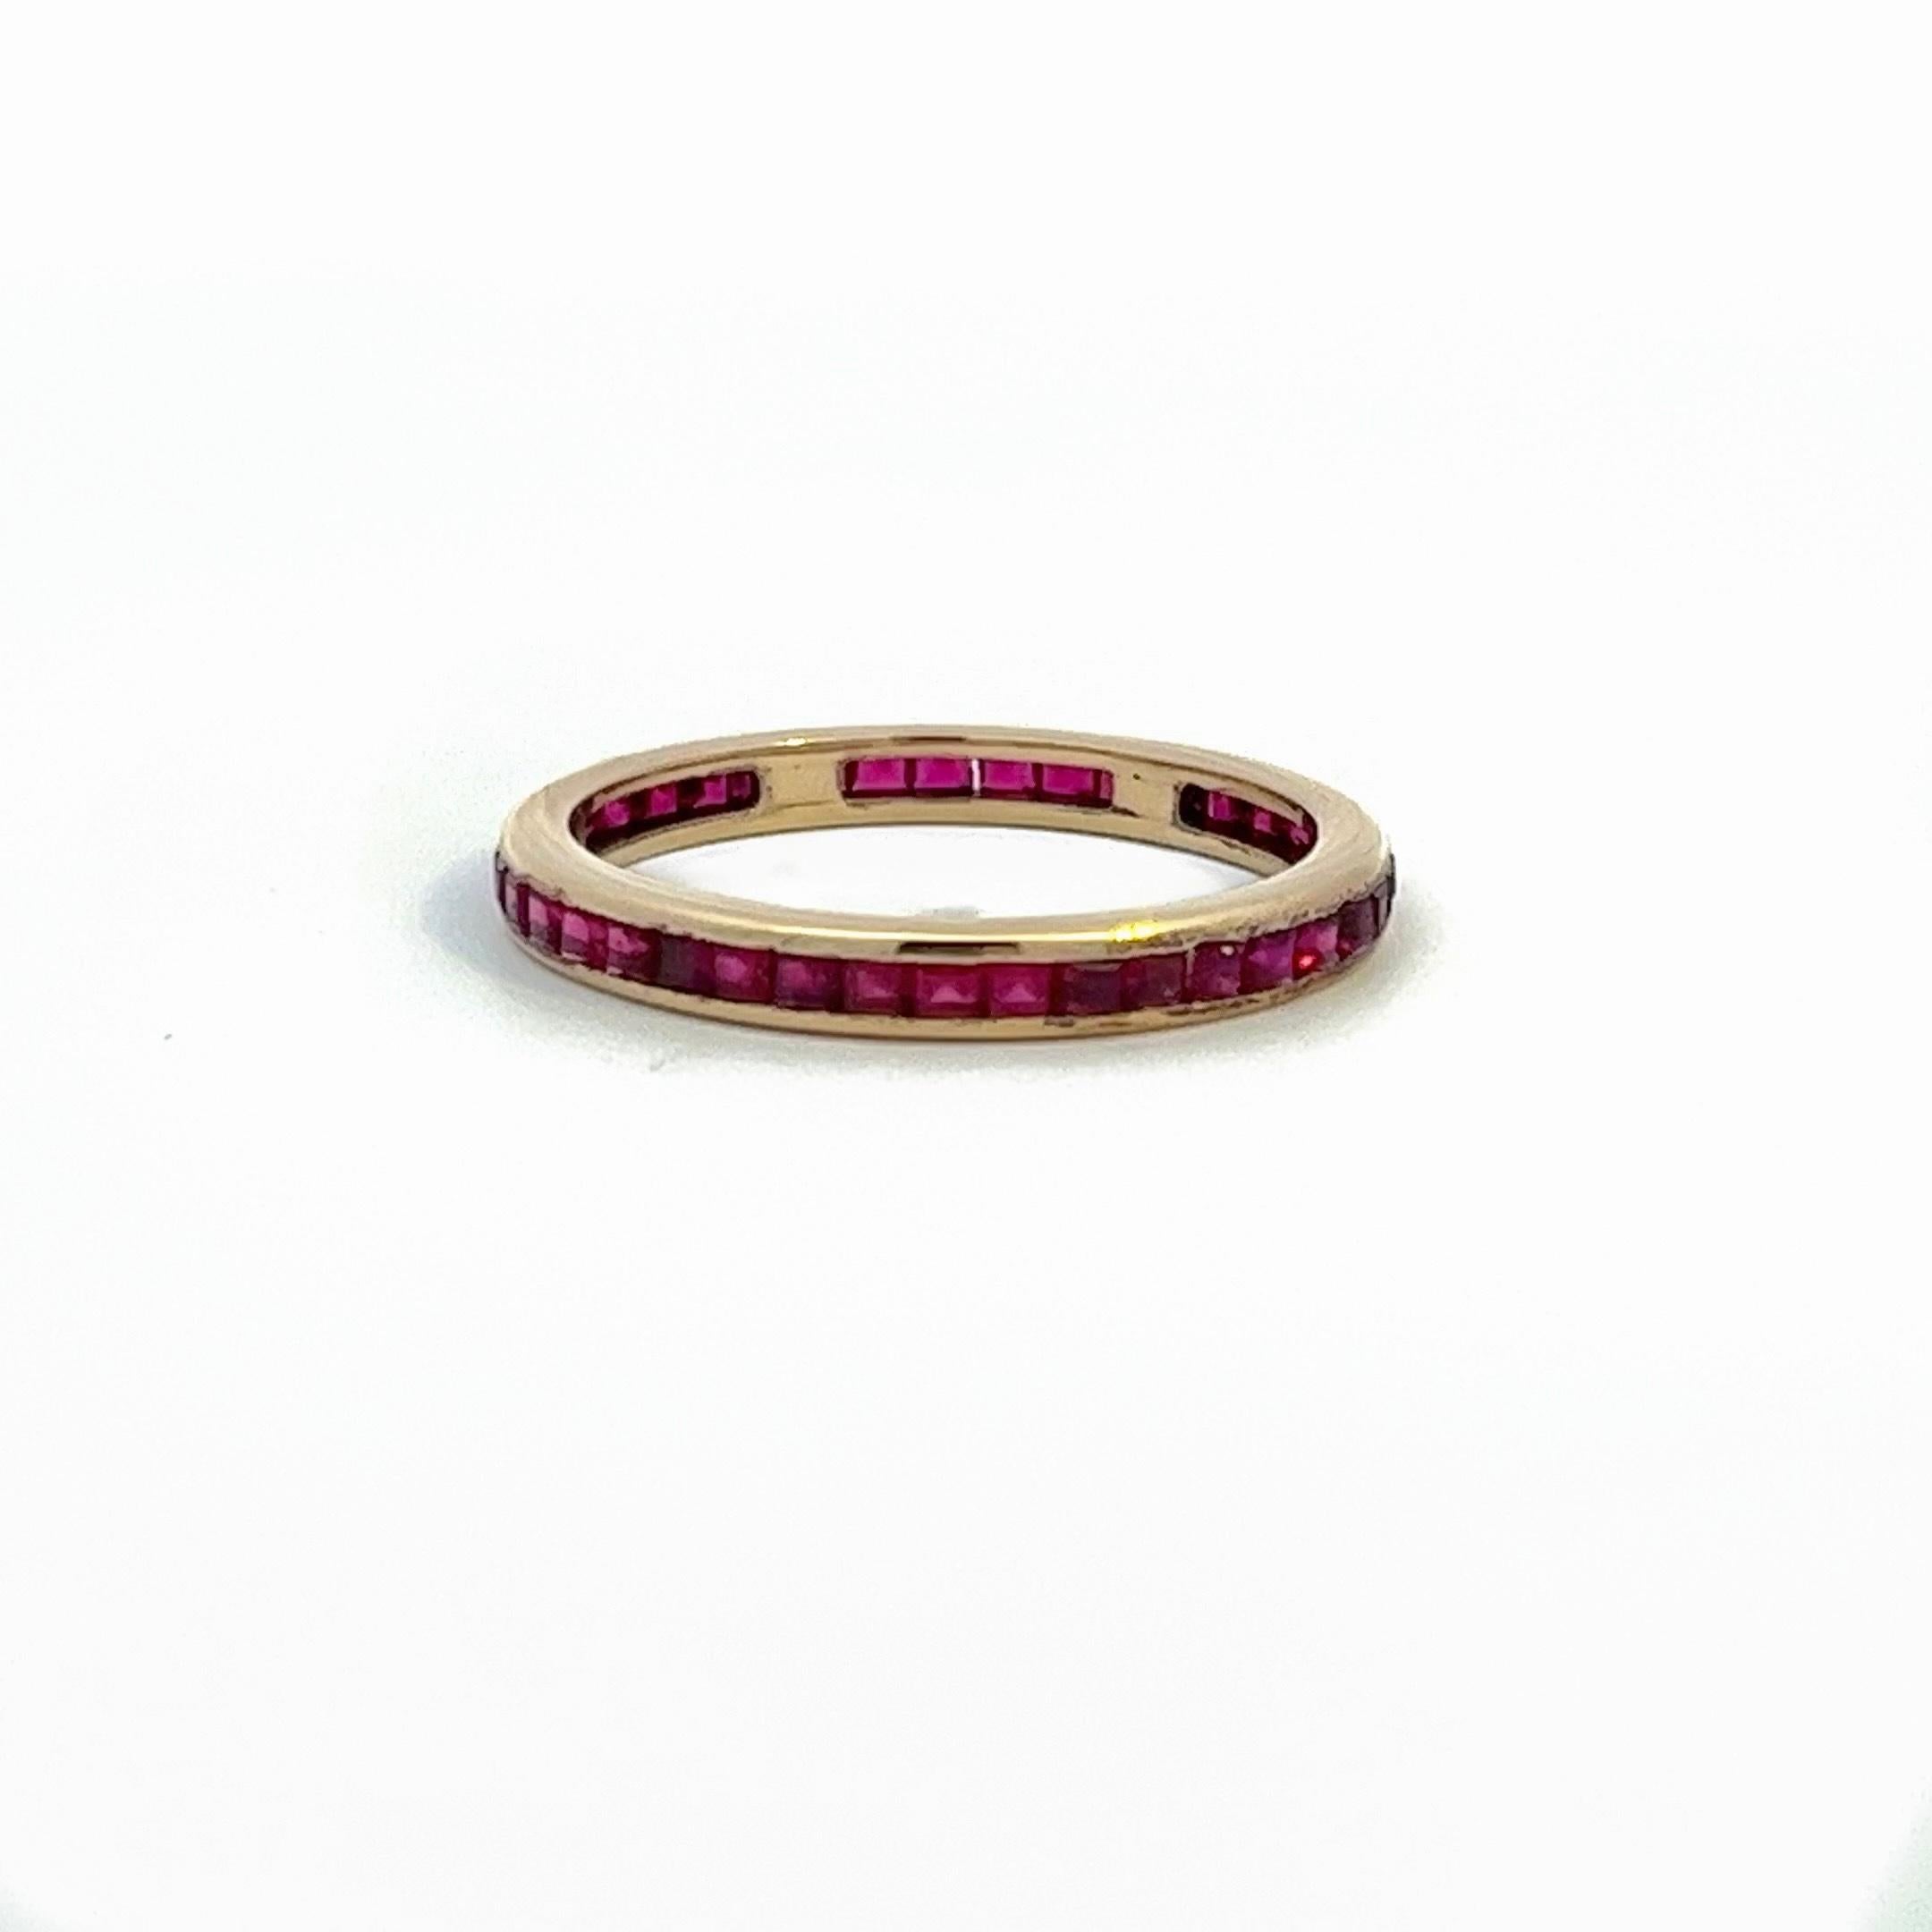 Vintage Retro 14 Karat Yellow Gold French Cut Ruby Eternity Band .80 Carats In Fair Condition For Sale In Fairfield, CT